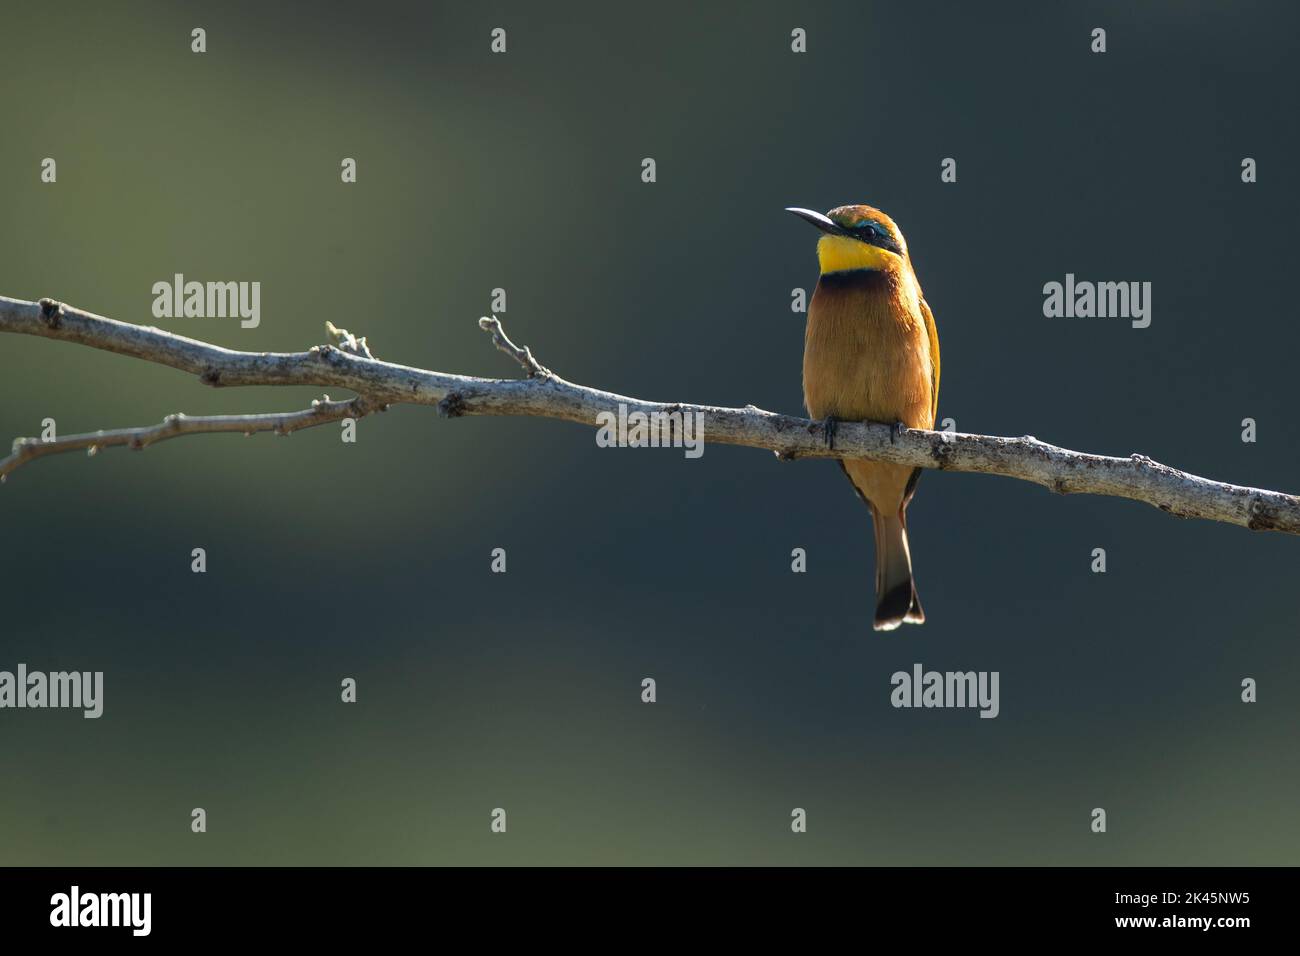 A European bee-eater, Merops apiaster, perches on a branch Stock Photo